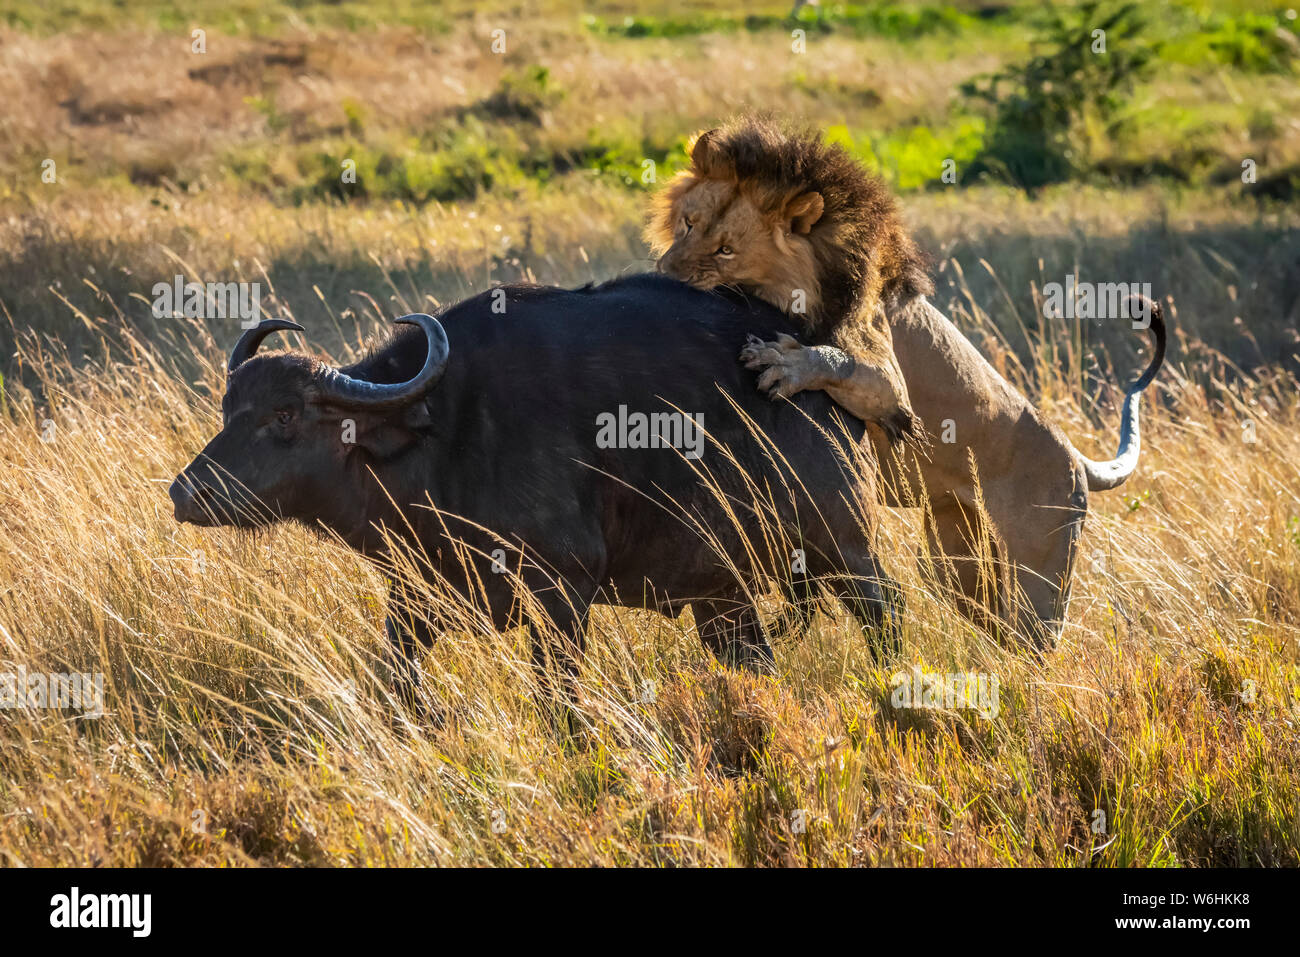 Buffalo High Resolution Stock Photography and Images - Alamy